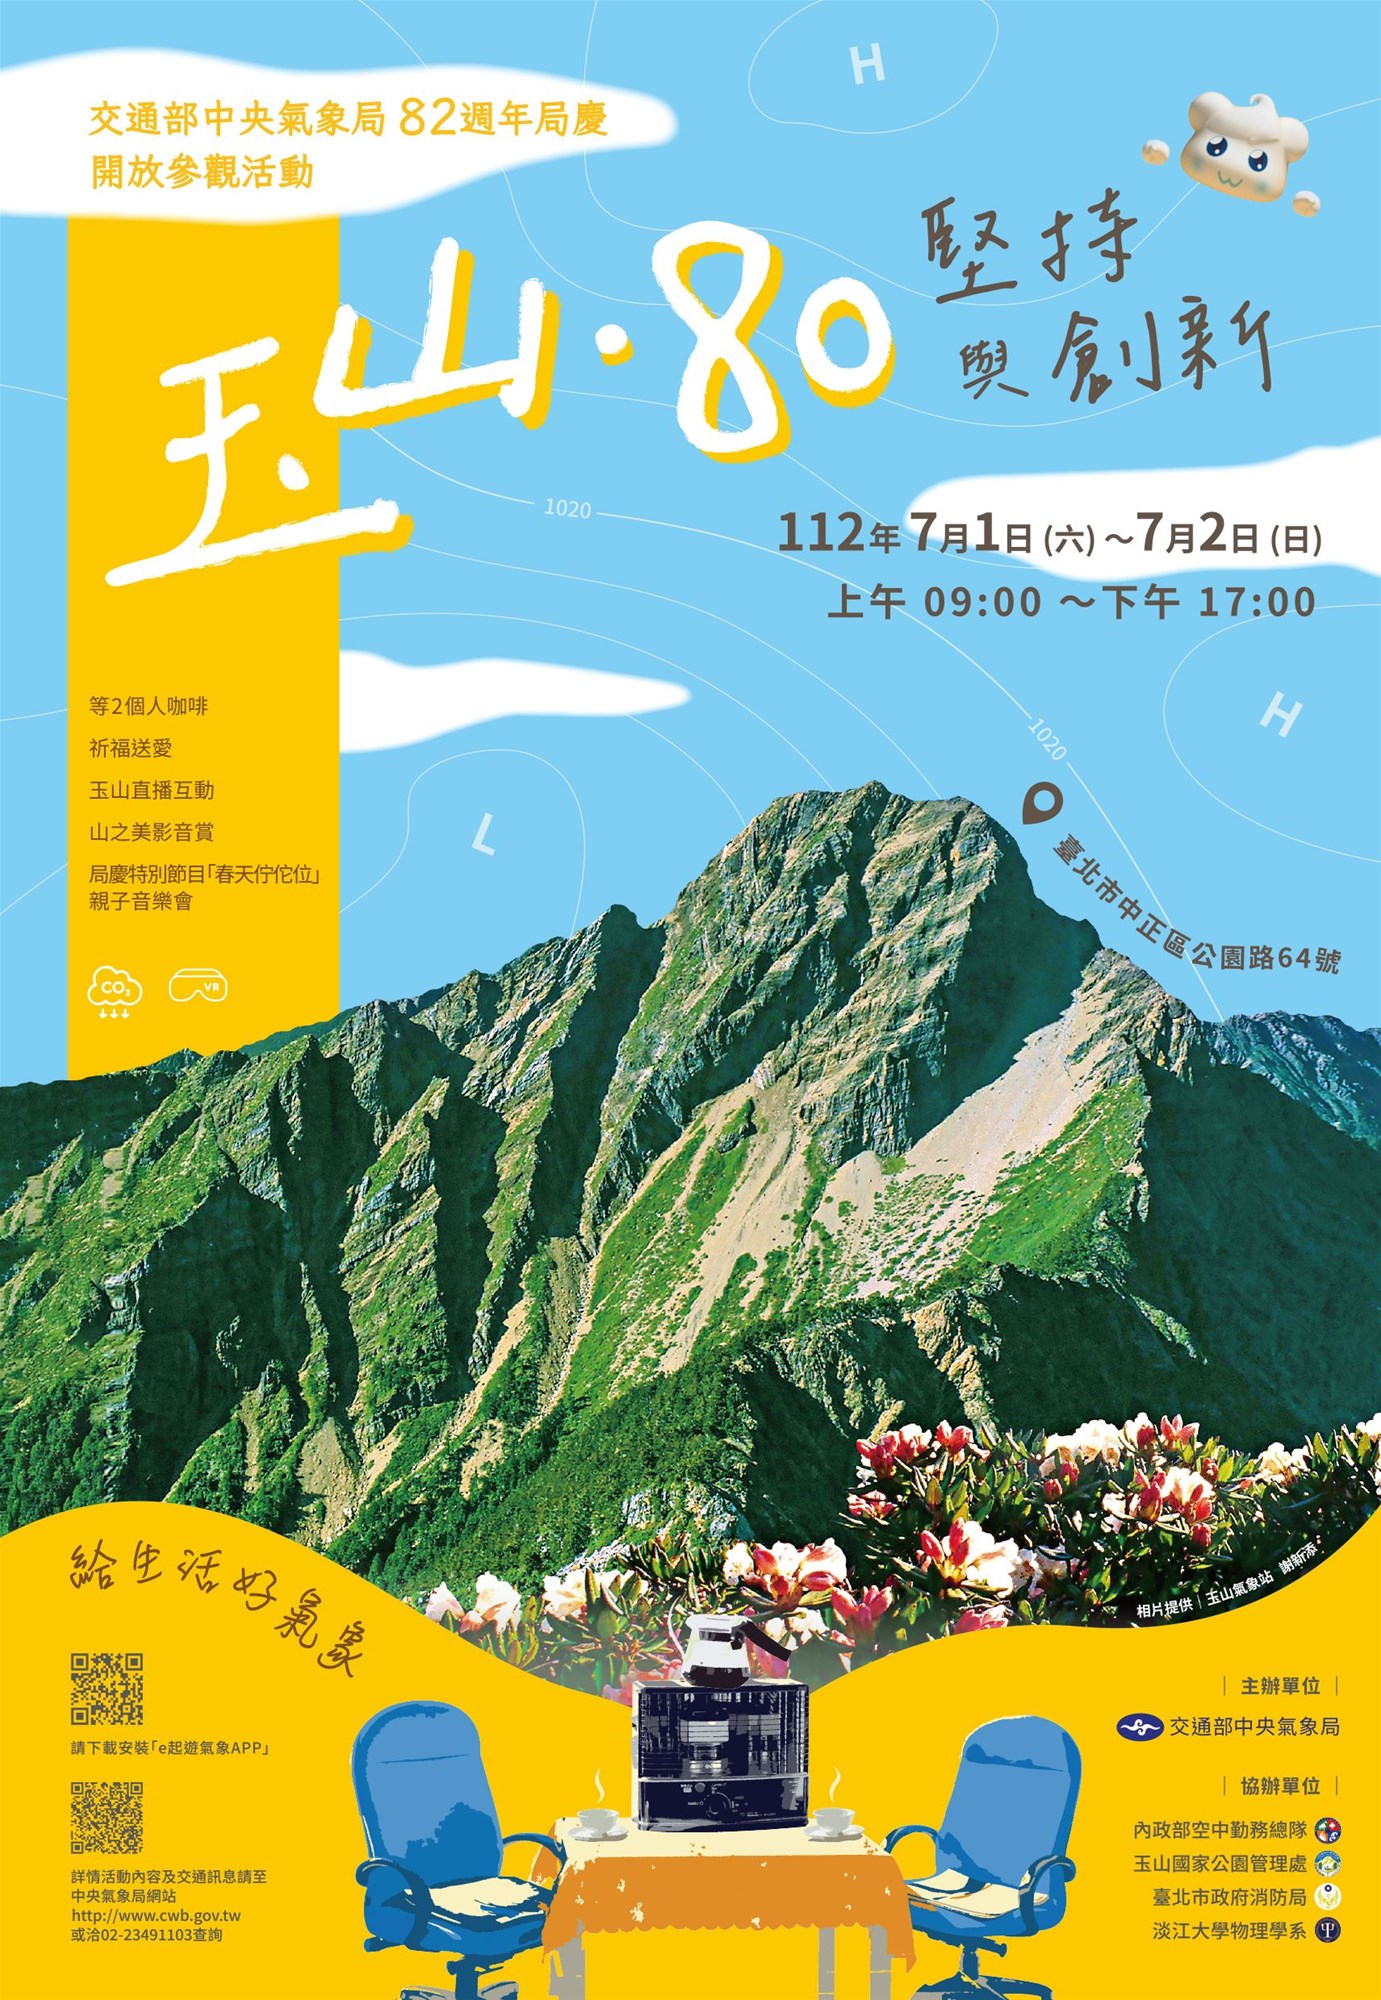 Yushan 80-Persistence and Innovation Special Exhibition